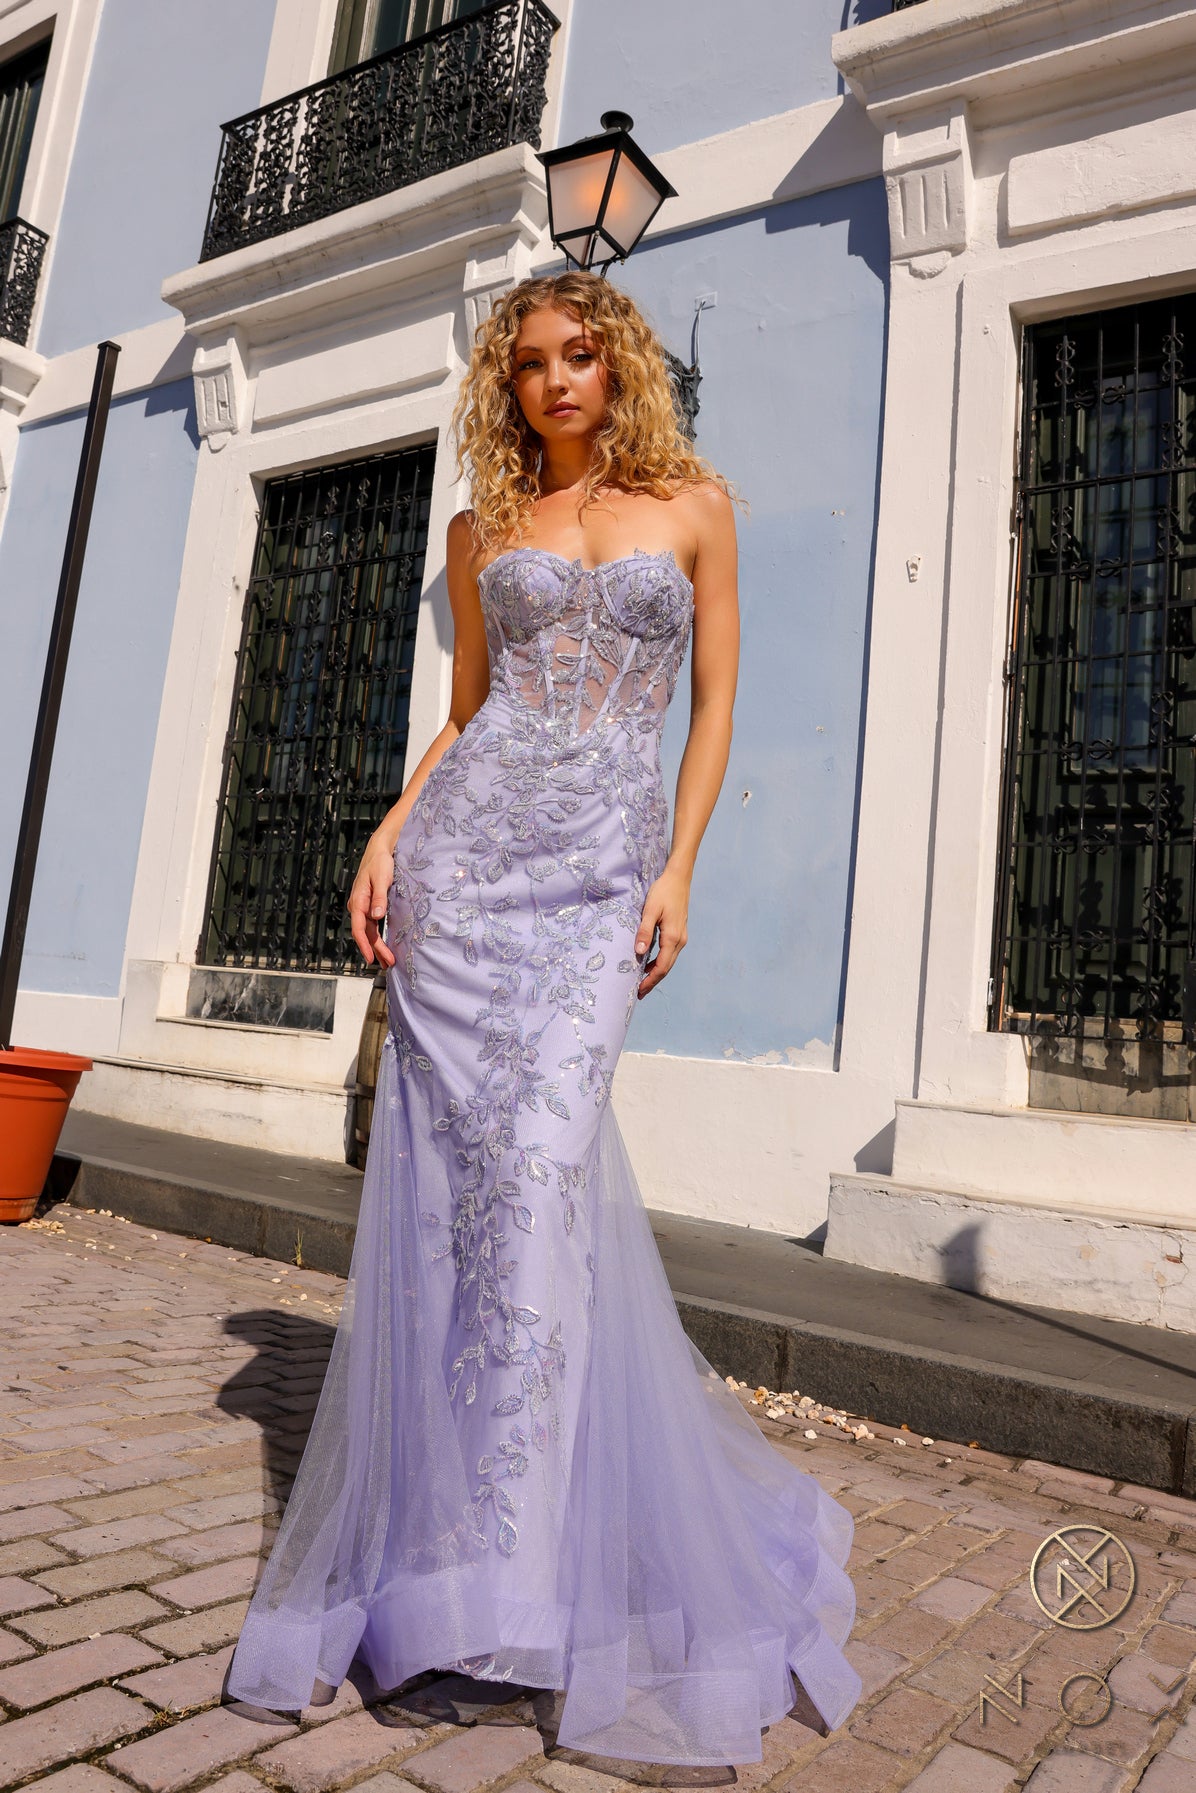 Nox Anabel -G1258 Fitted Strapless Mermaid Dress